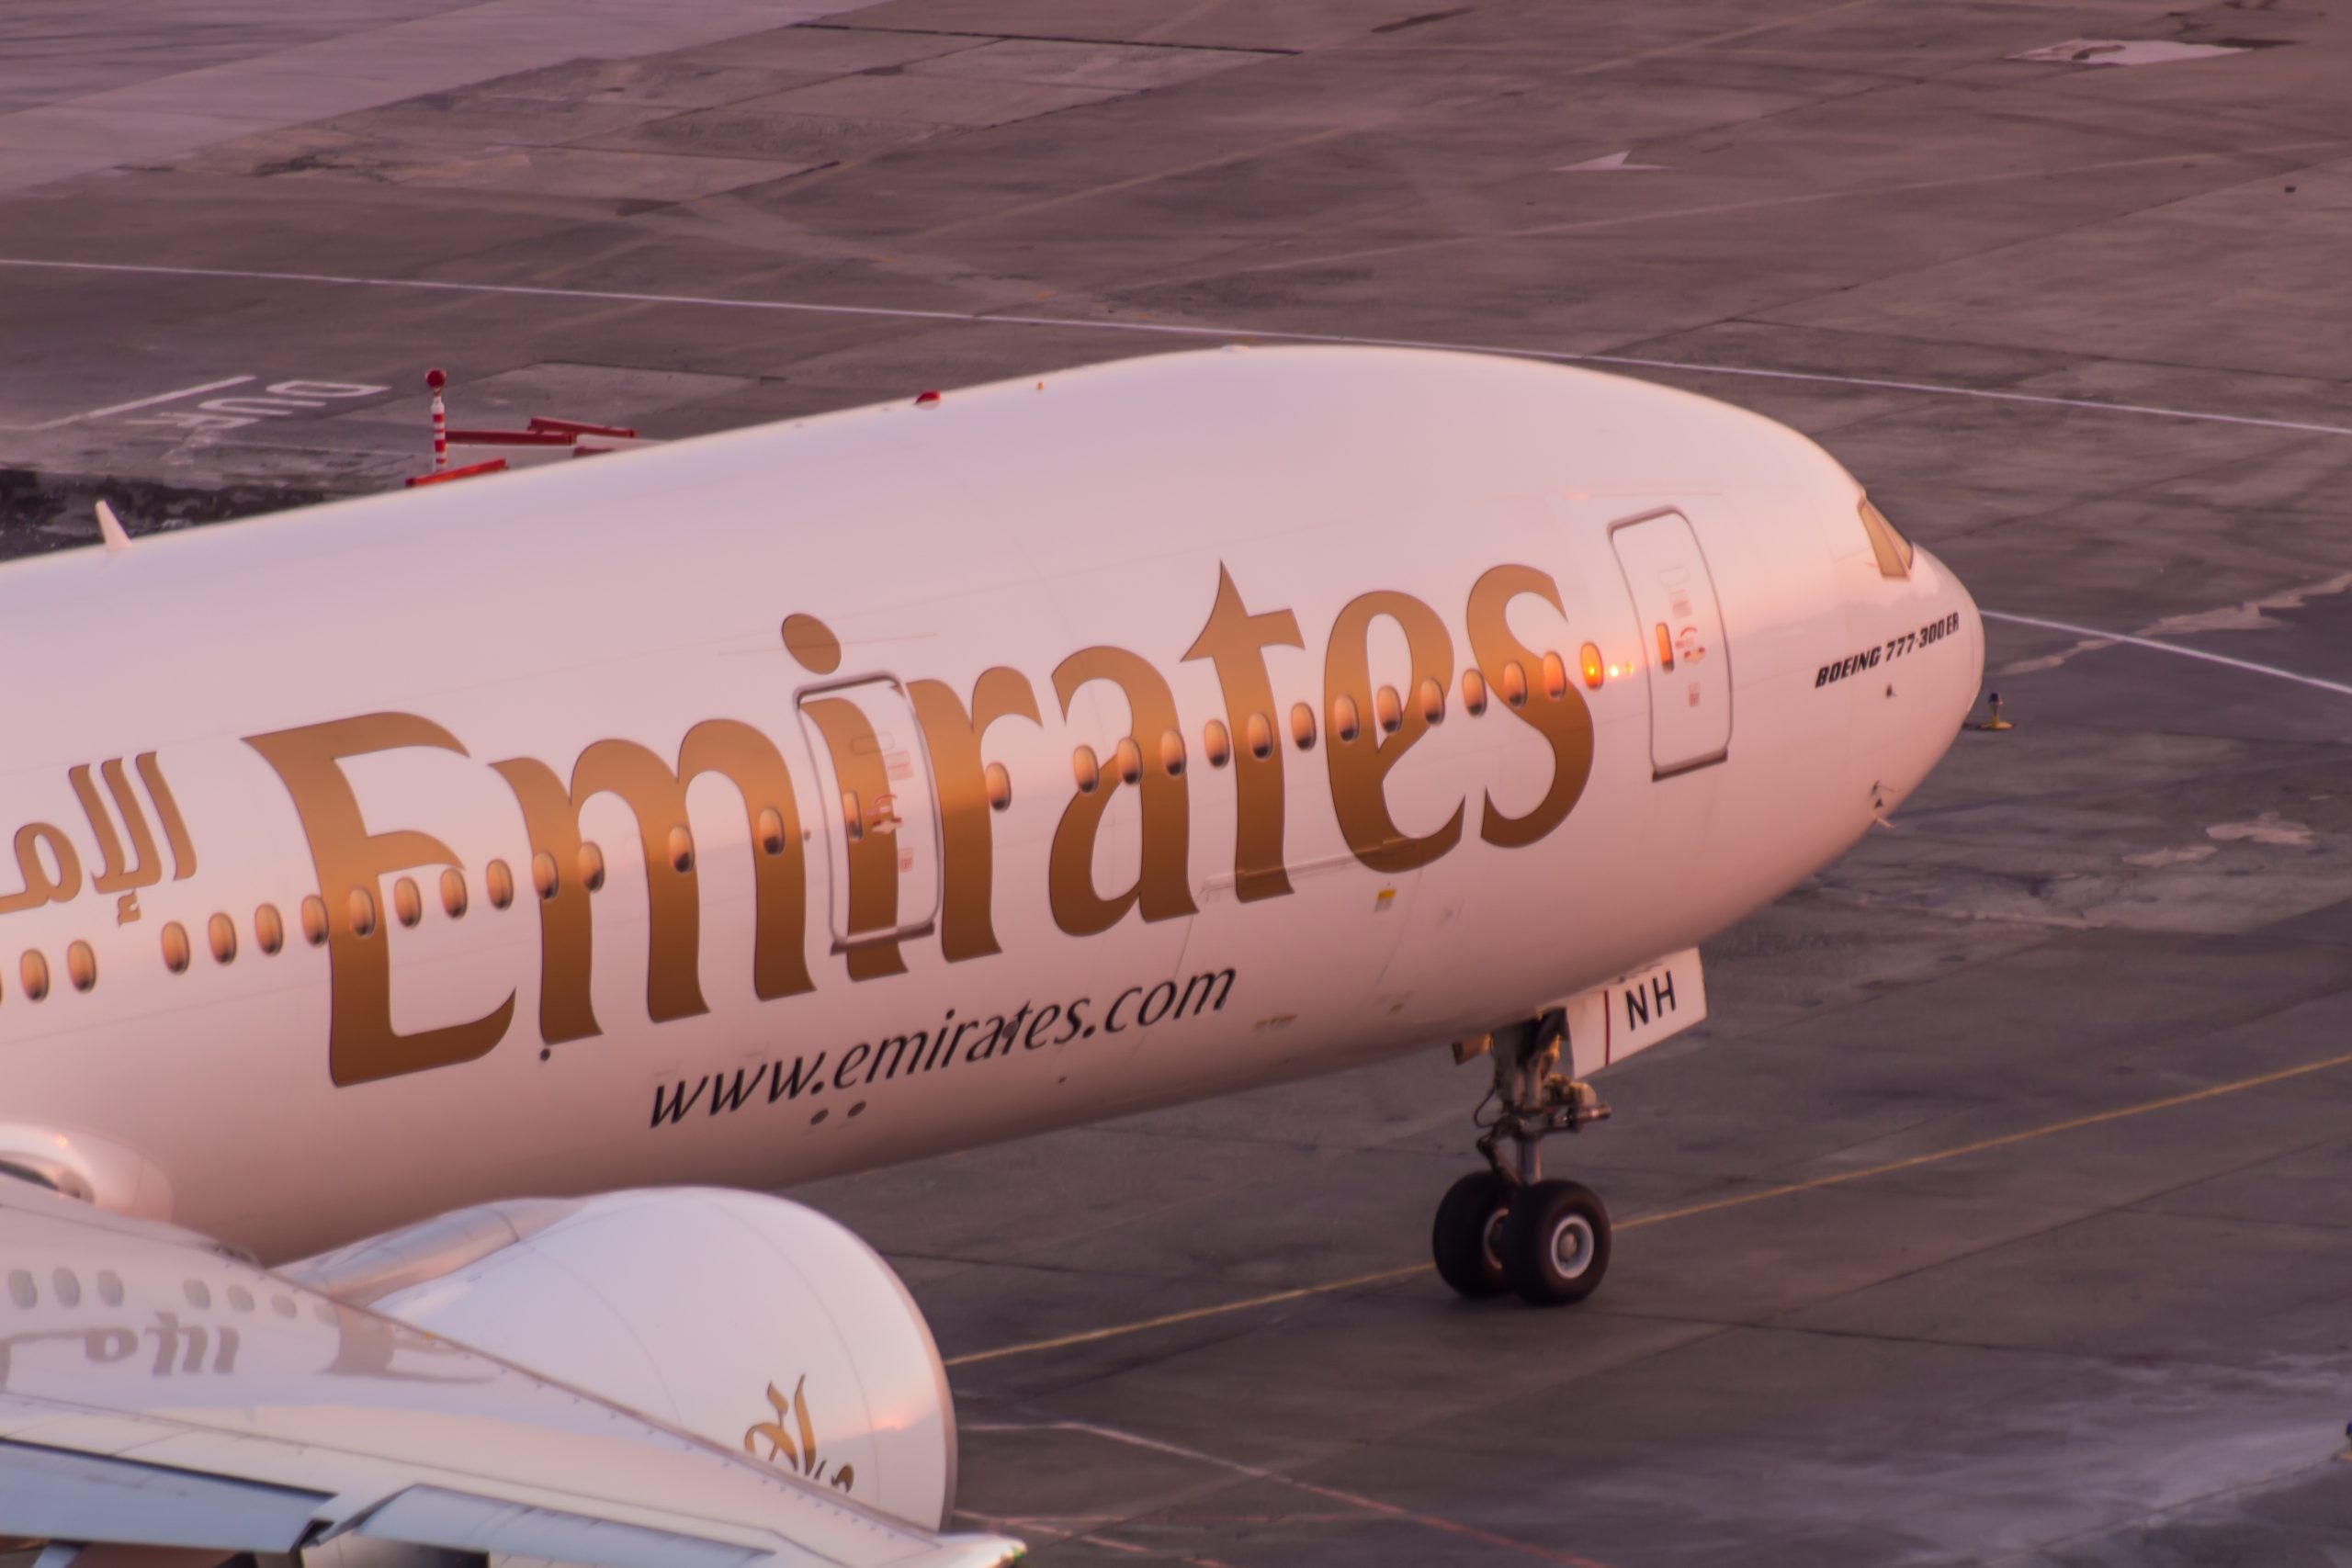 Emirates is Planning to Refuel its U.S.-Bound Flights in Europe Due to Possible ..